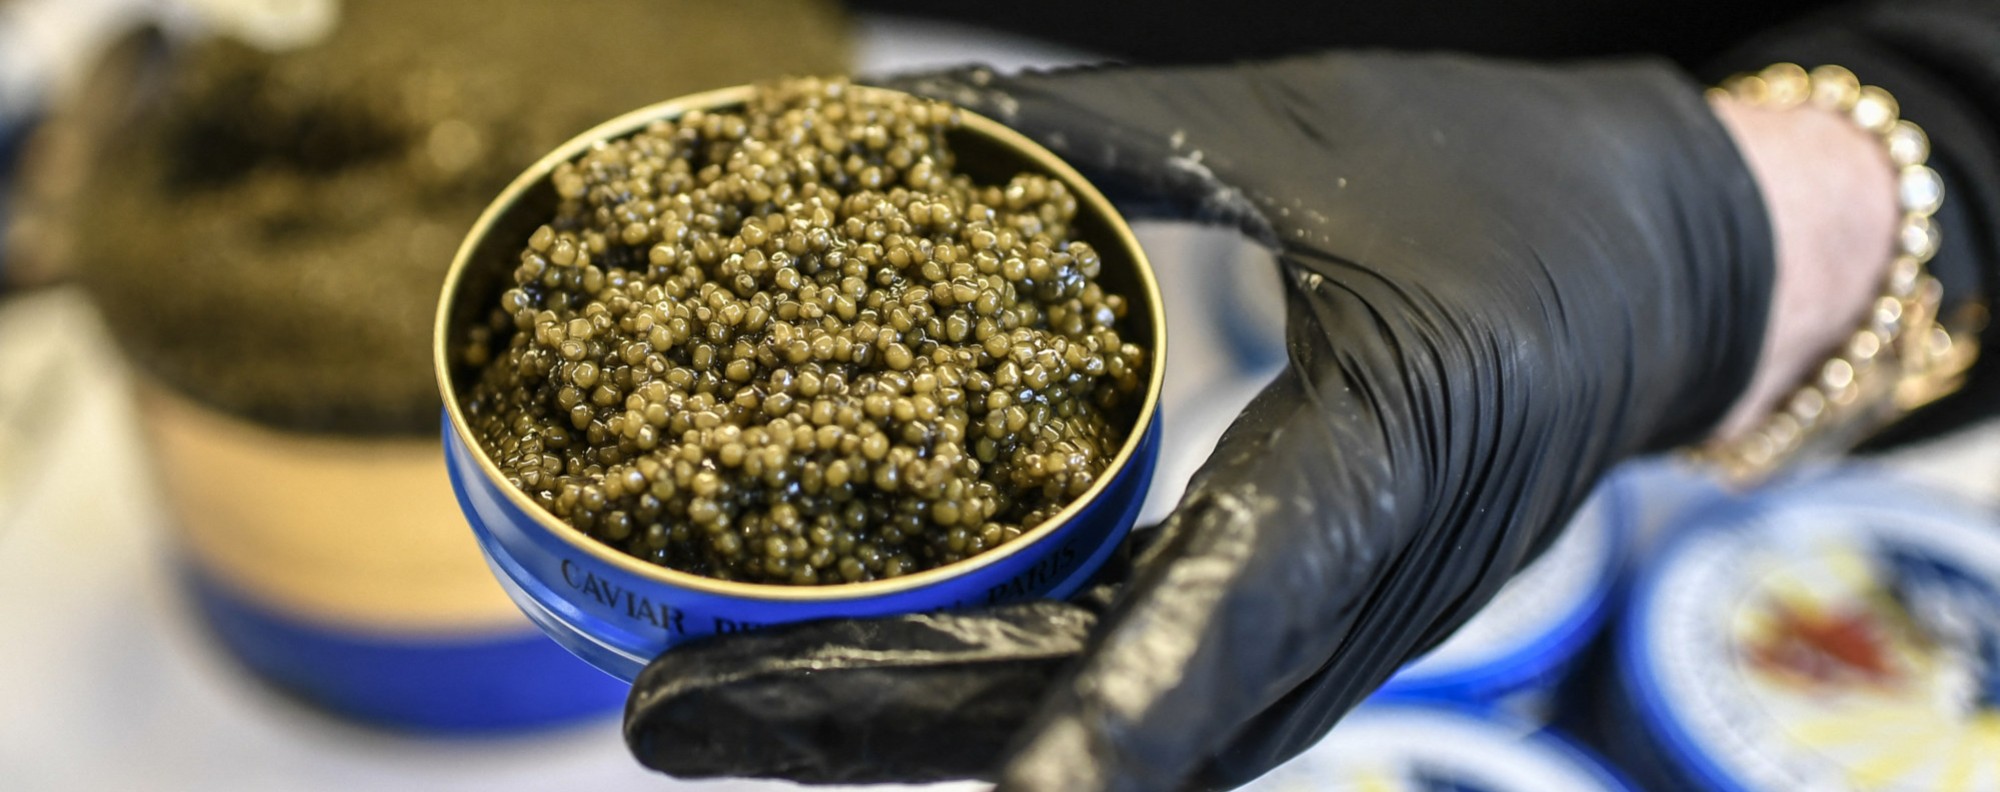 Caviar 'Bumps' Are All the Rage - The New York Times